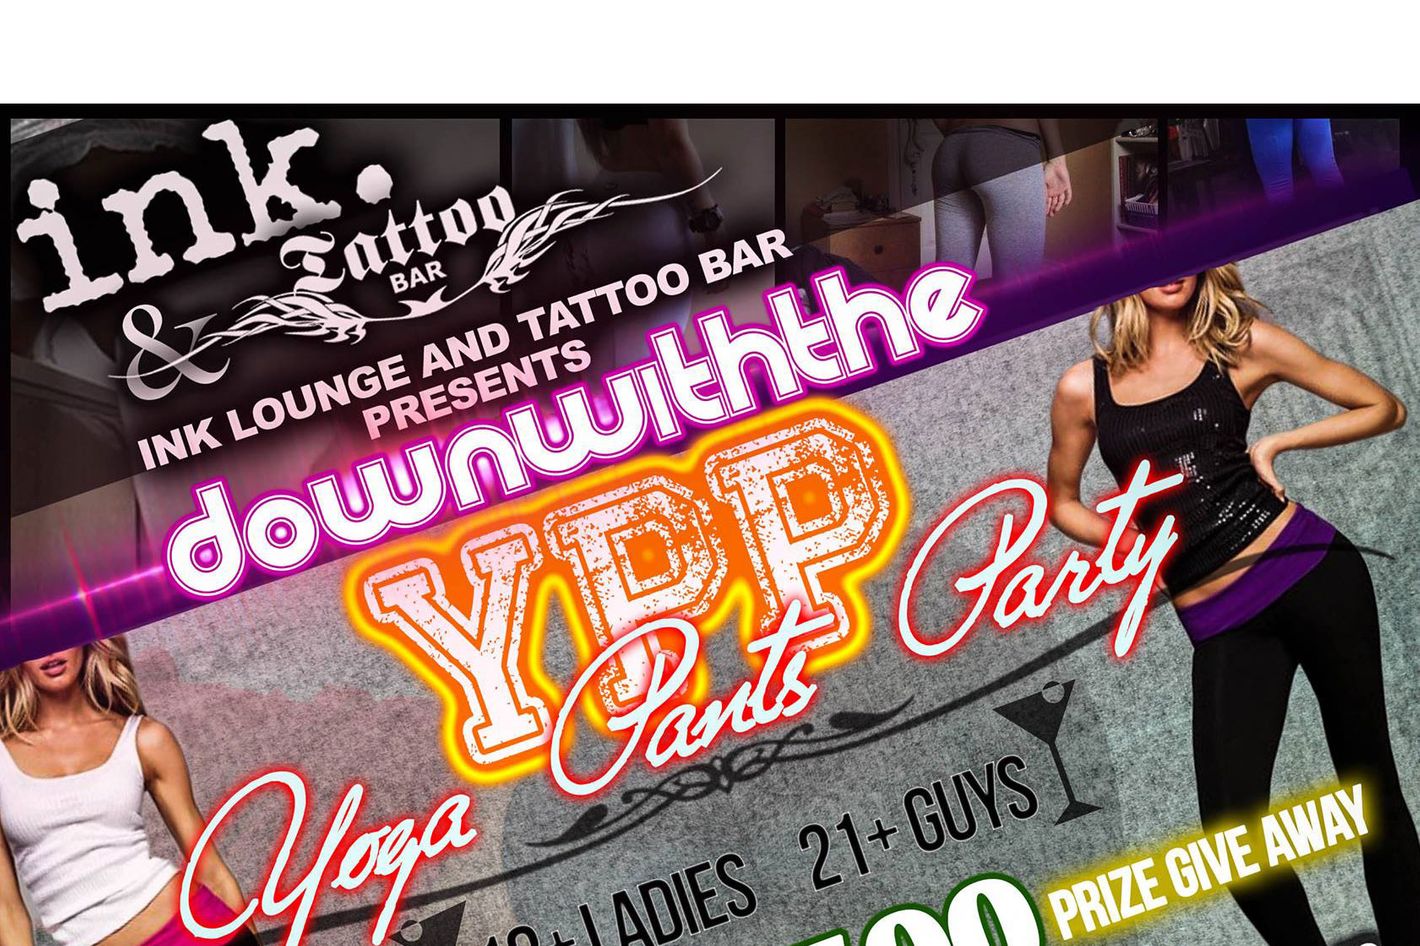 This Nightclub Is Throwing a Yoga Pants Party